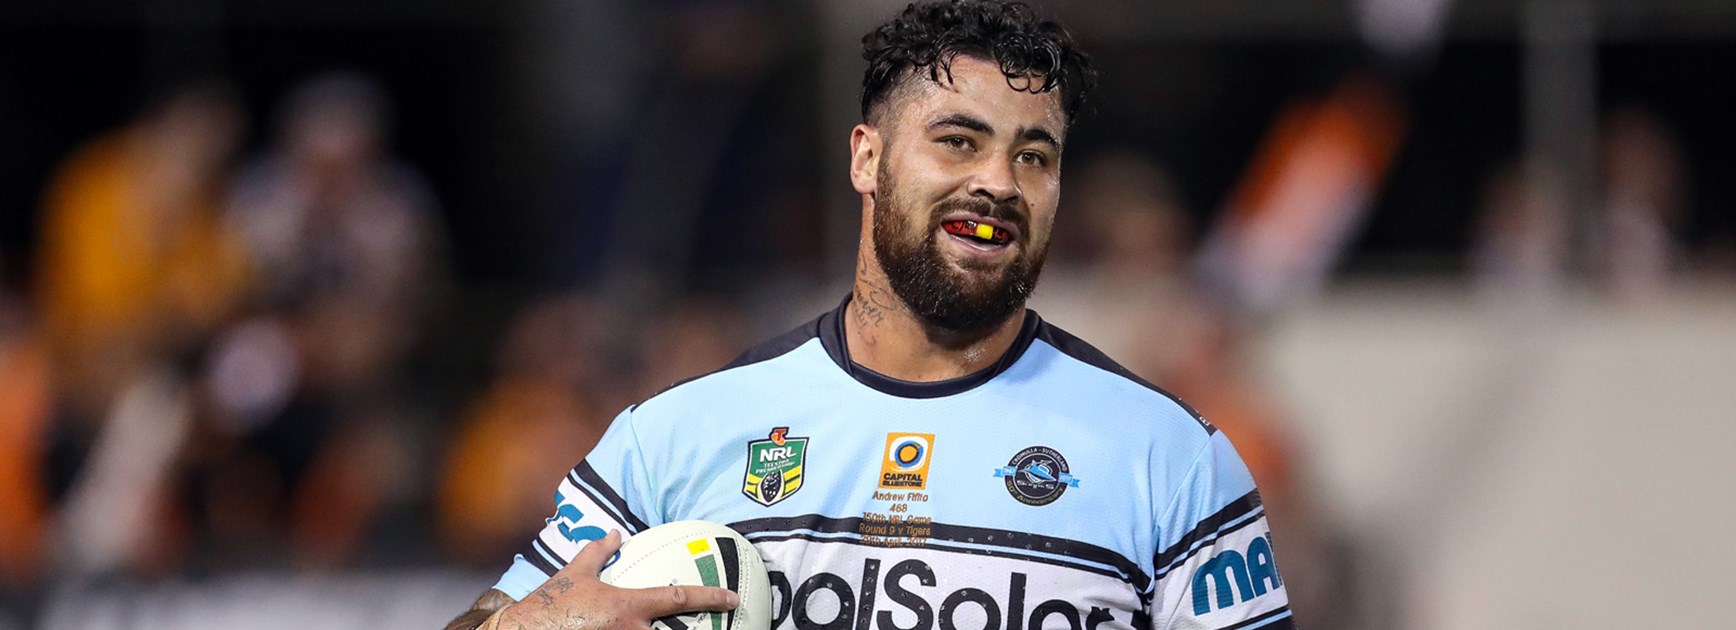 Fifita re-signs with Cronulla